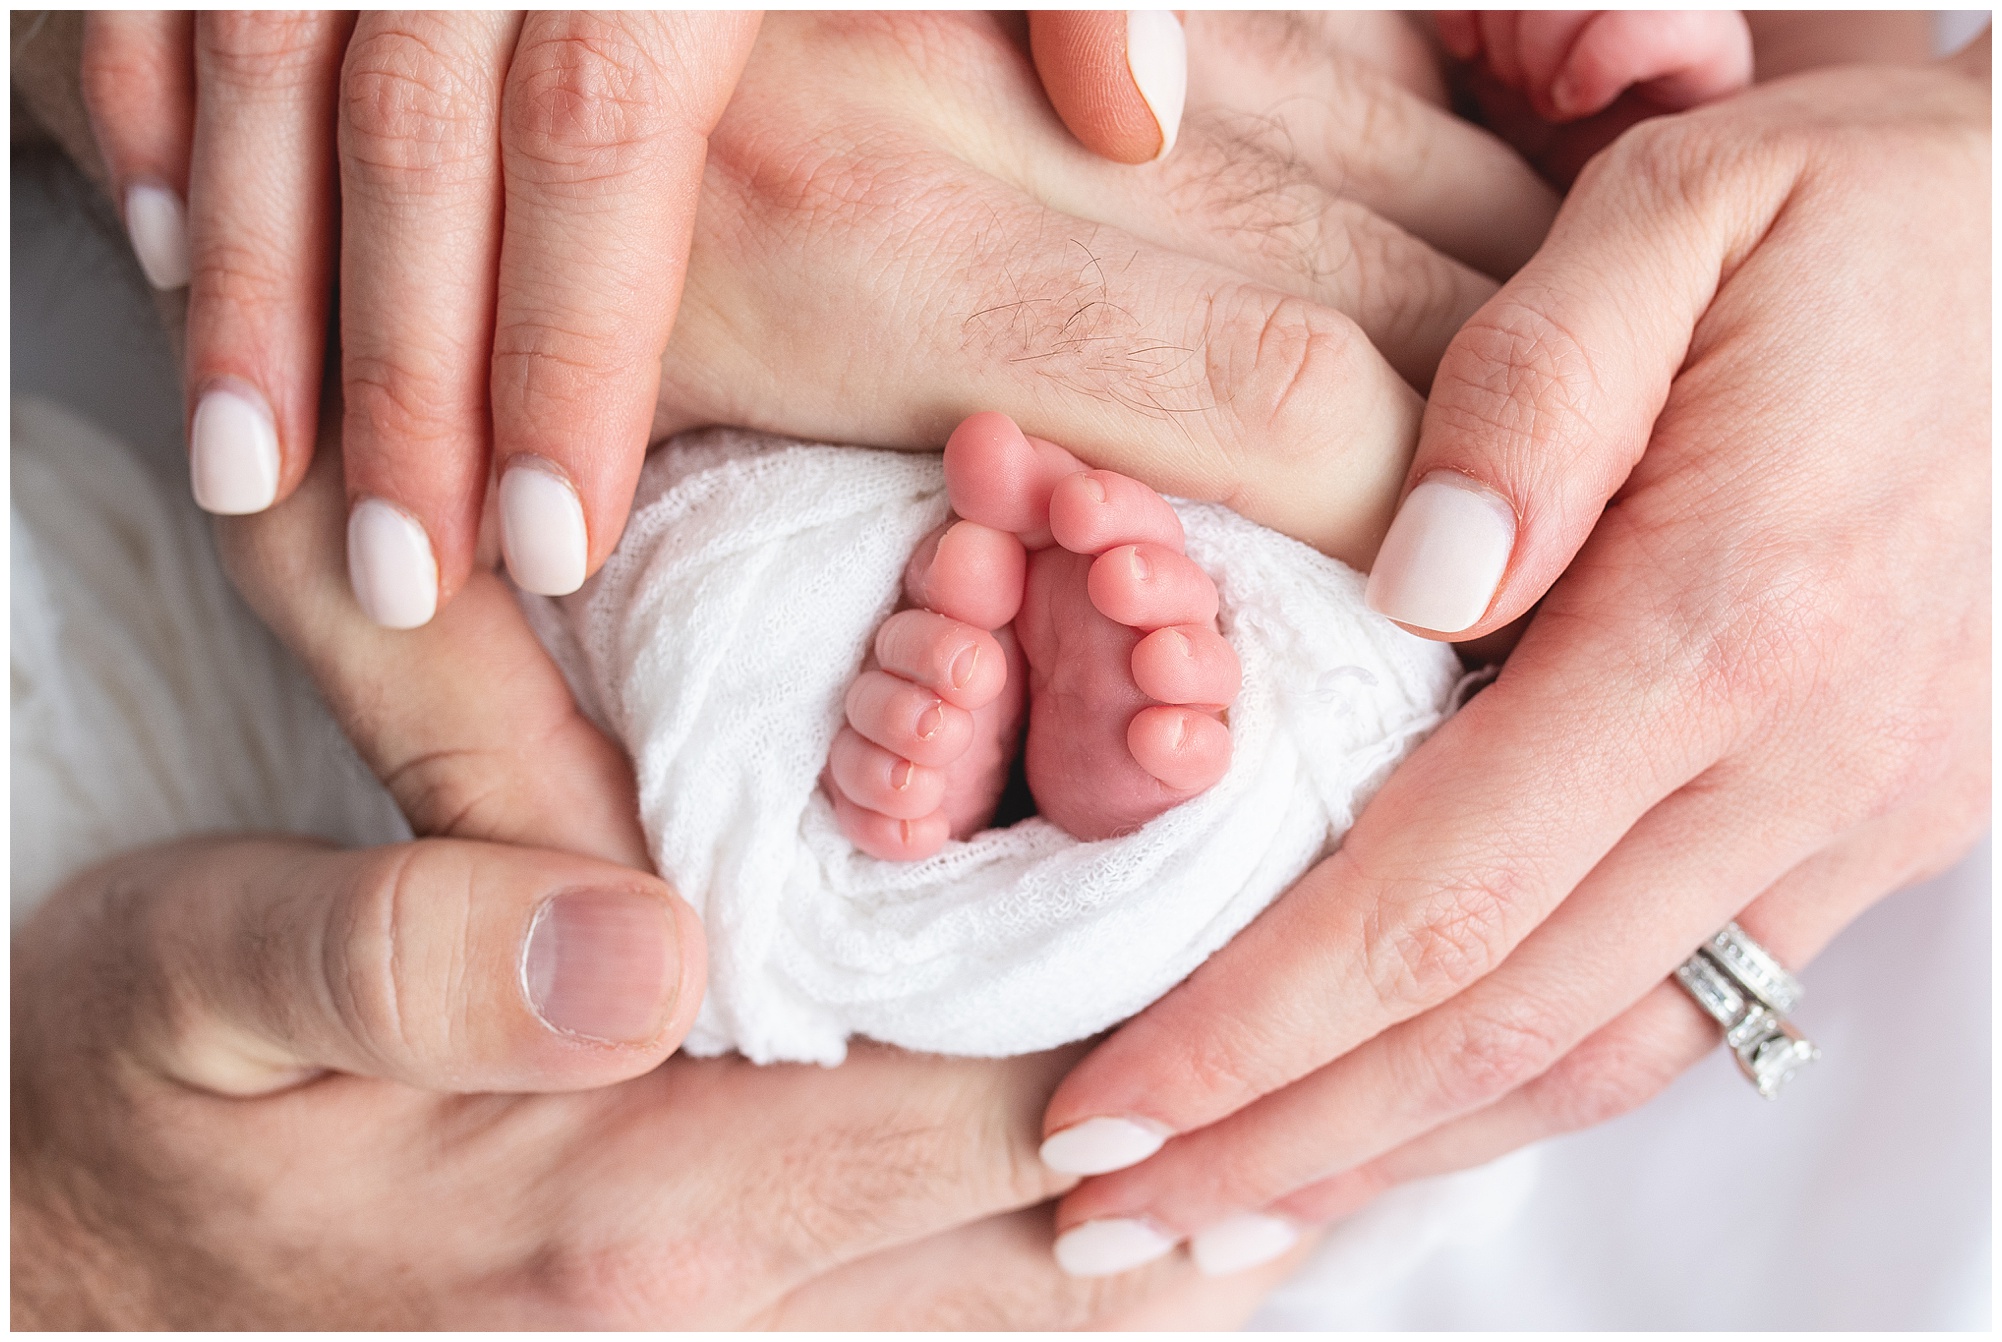 mom, dad and their new baby boy's toes all held together